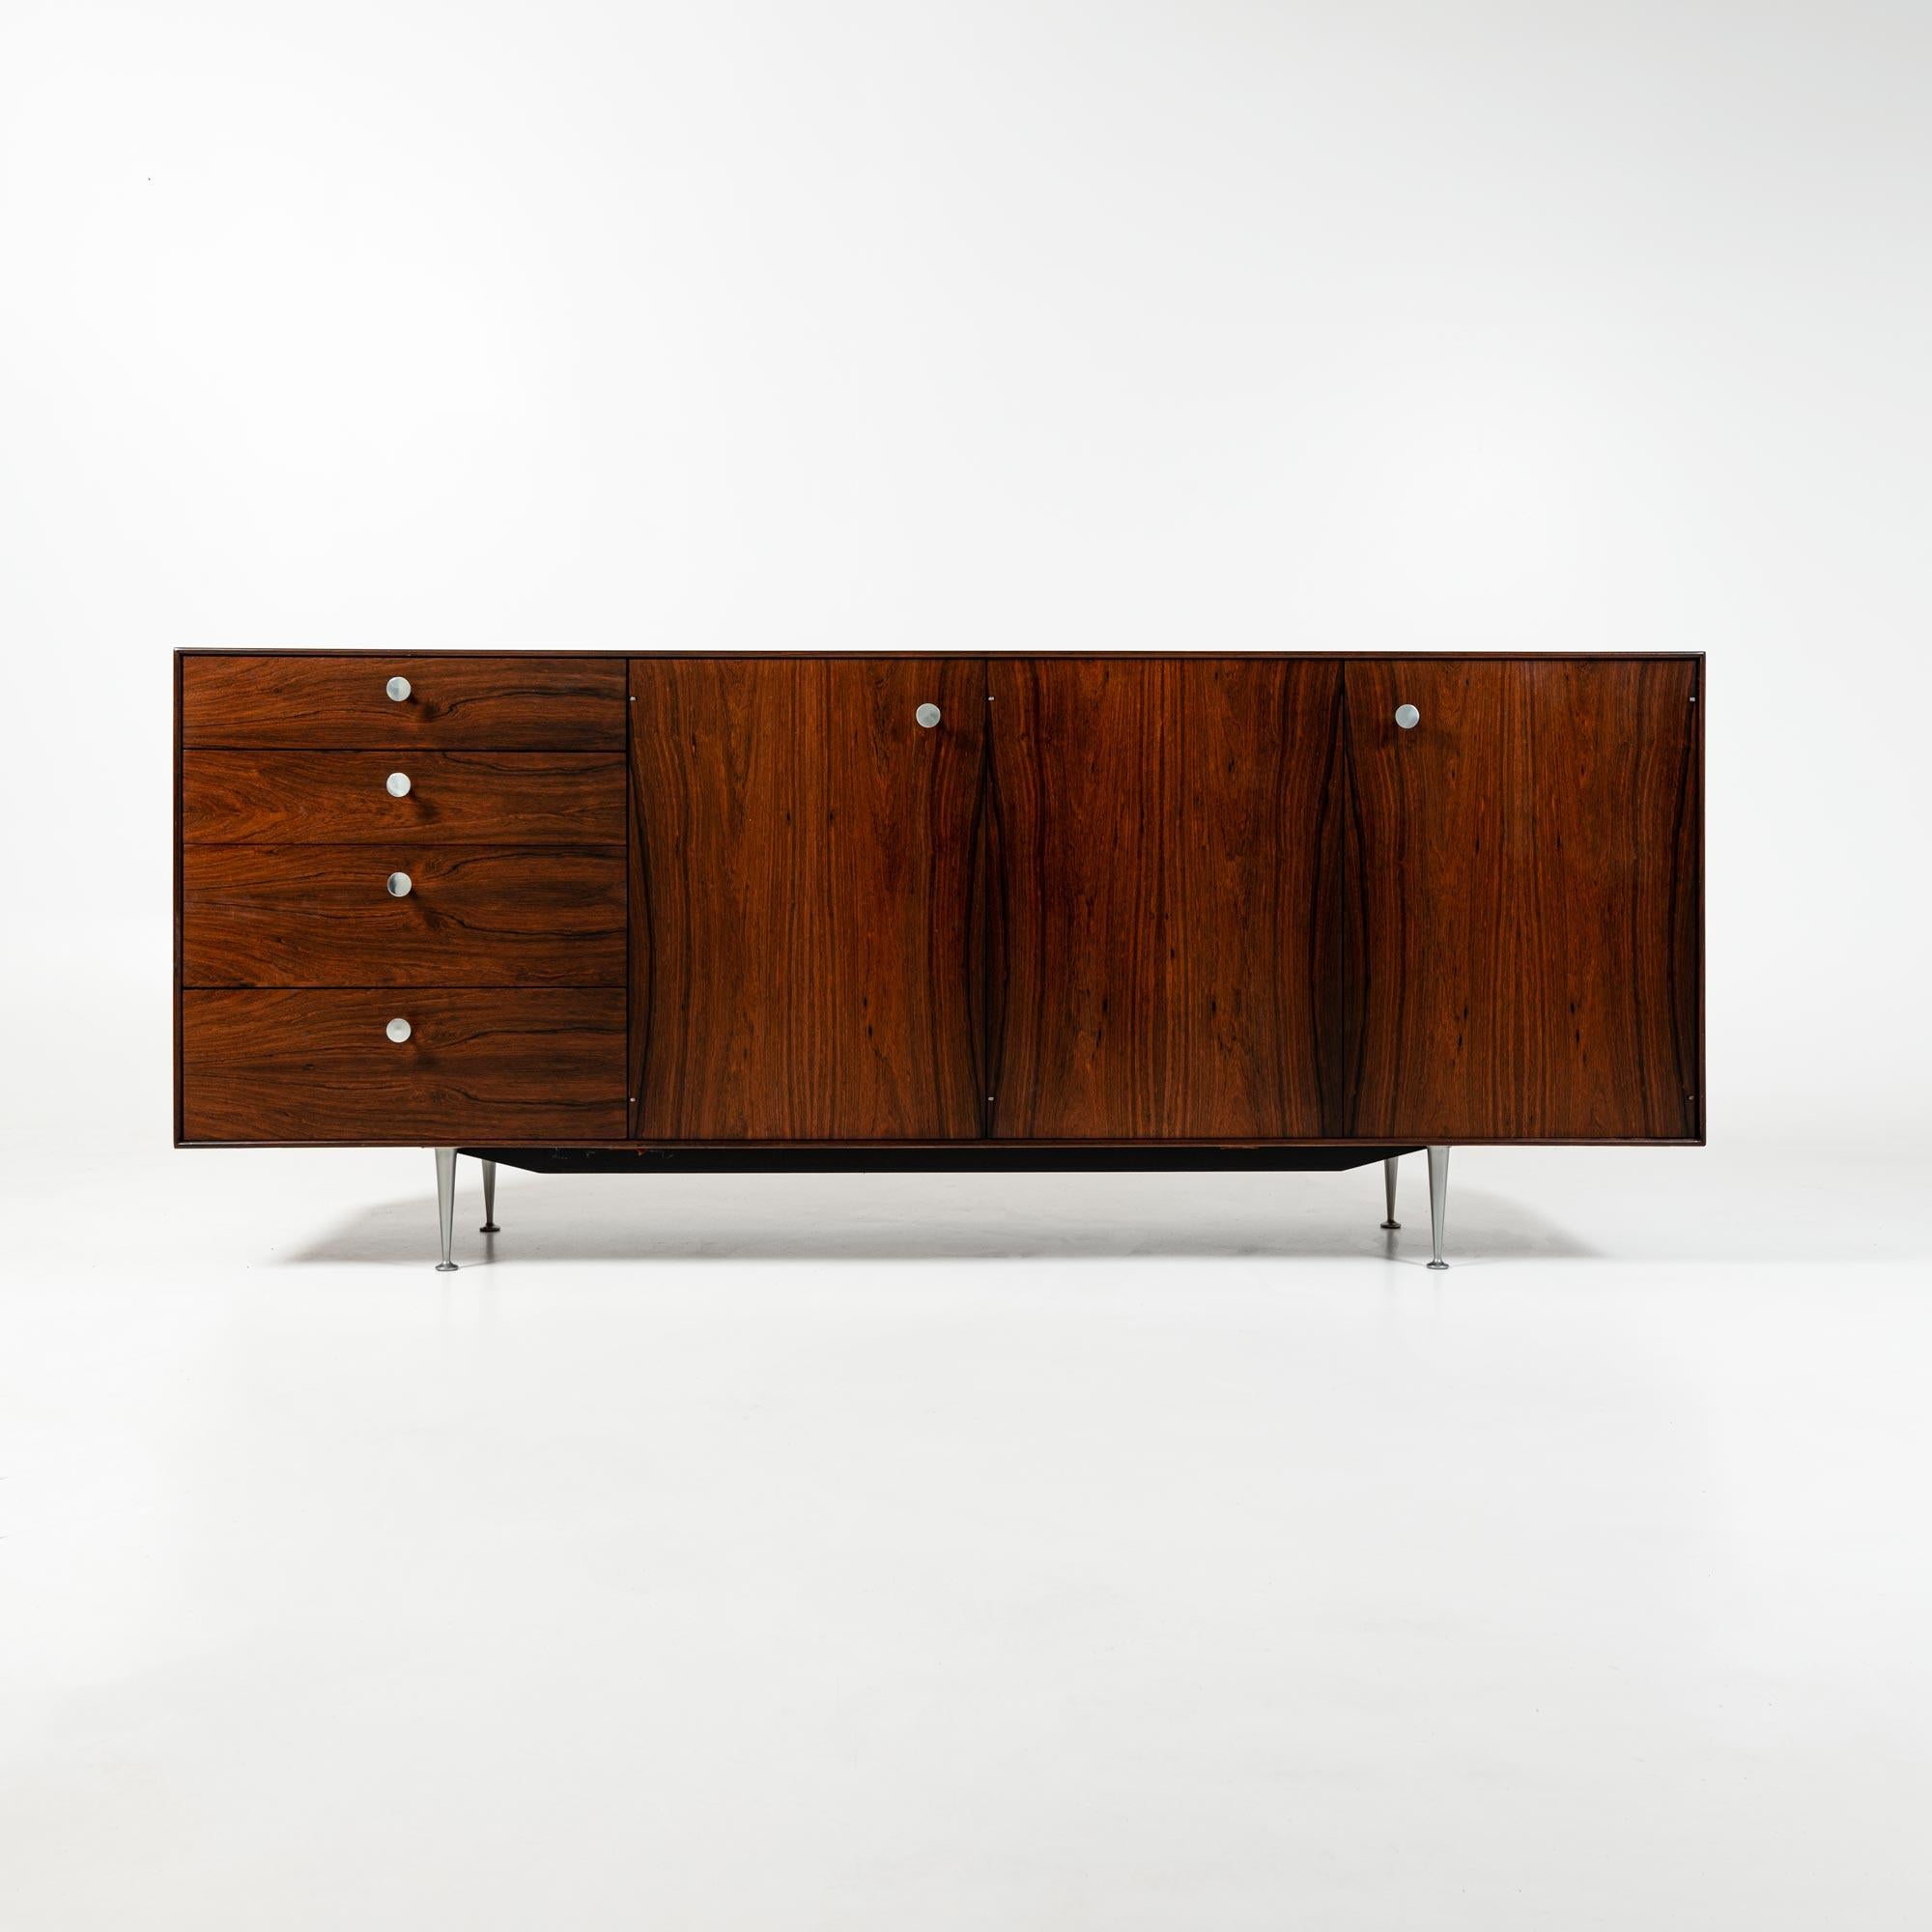 This is a rare Thin Edge credenza/cabinet in Rosewood from 1950s. It has several custom features including a cork-lined pull out for glassware, slits for cookie sheet storage, a pull out butcher's block cutting board, double utensil drawers and